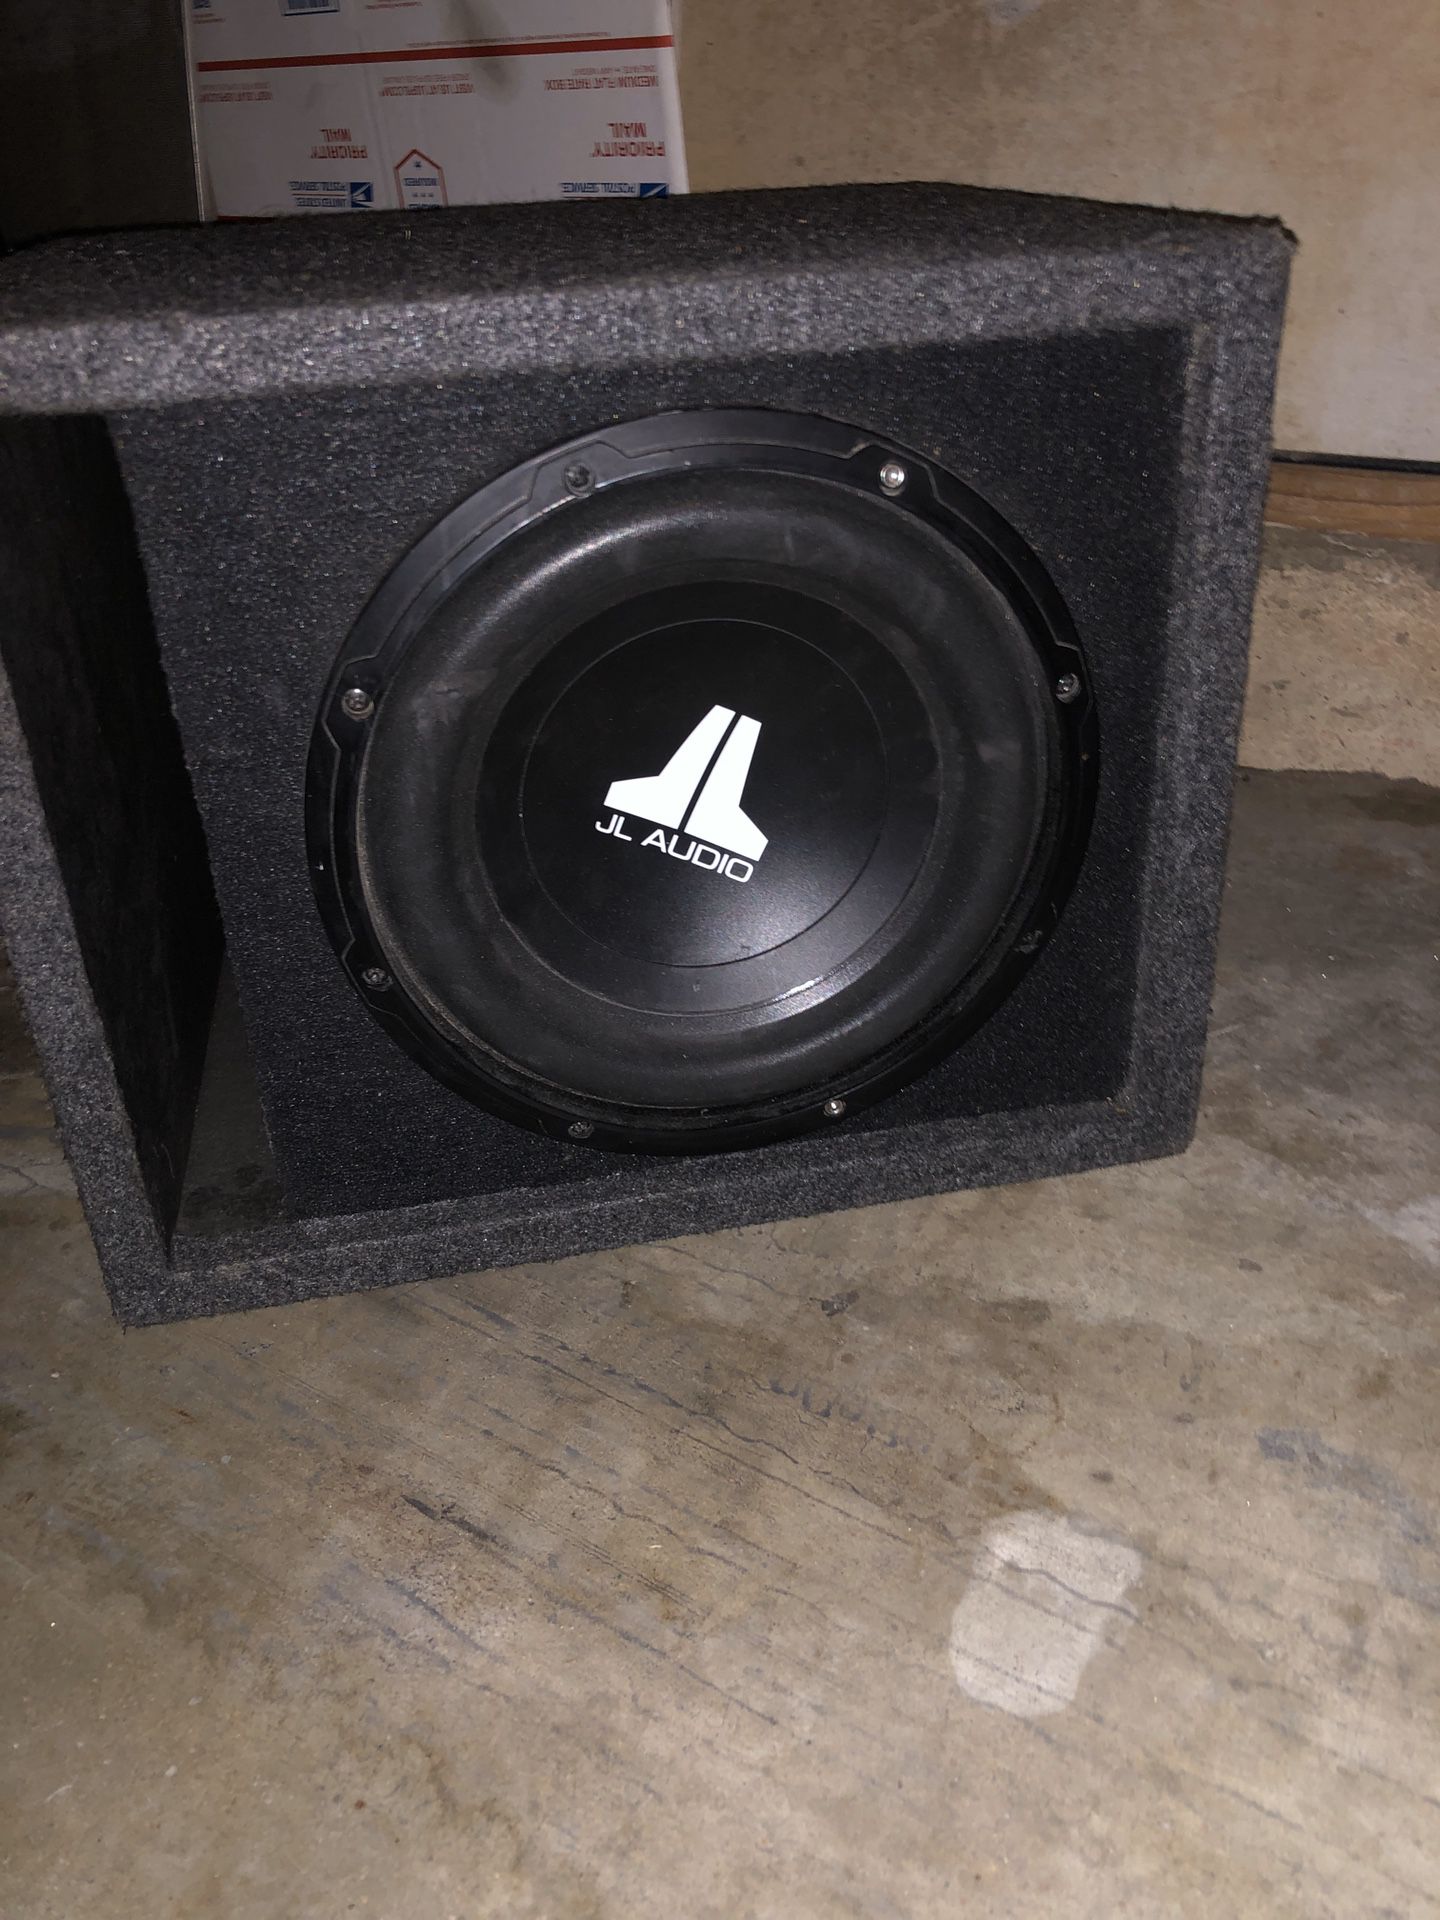 10” jl audio sub with ported box